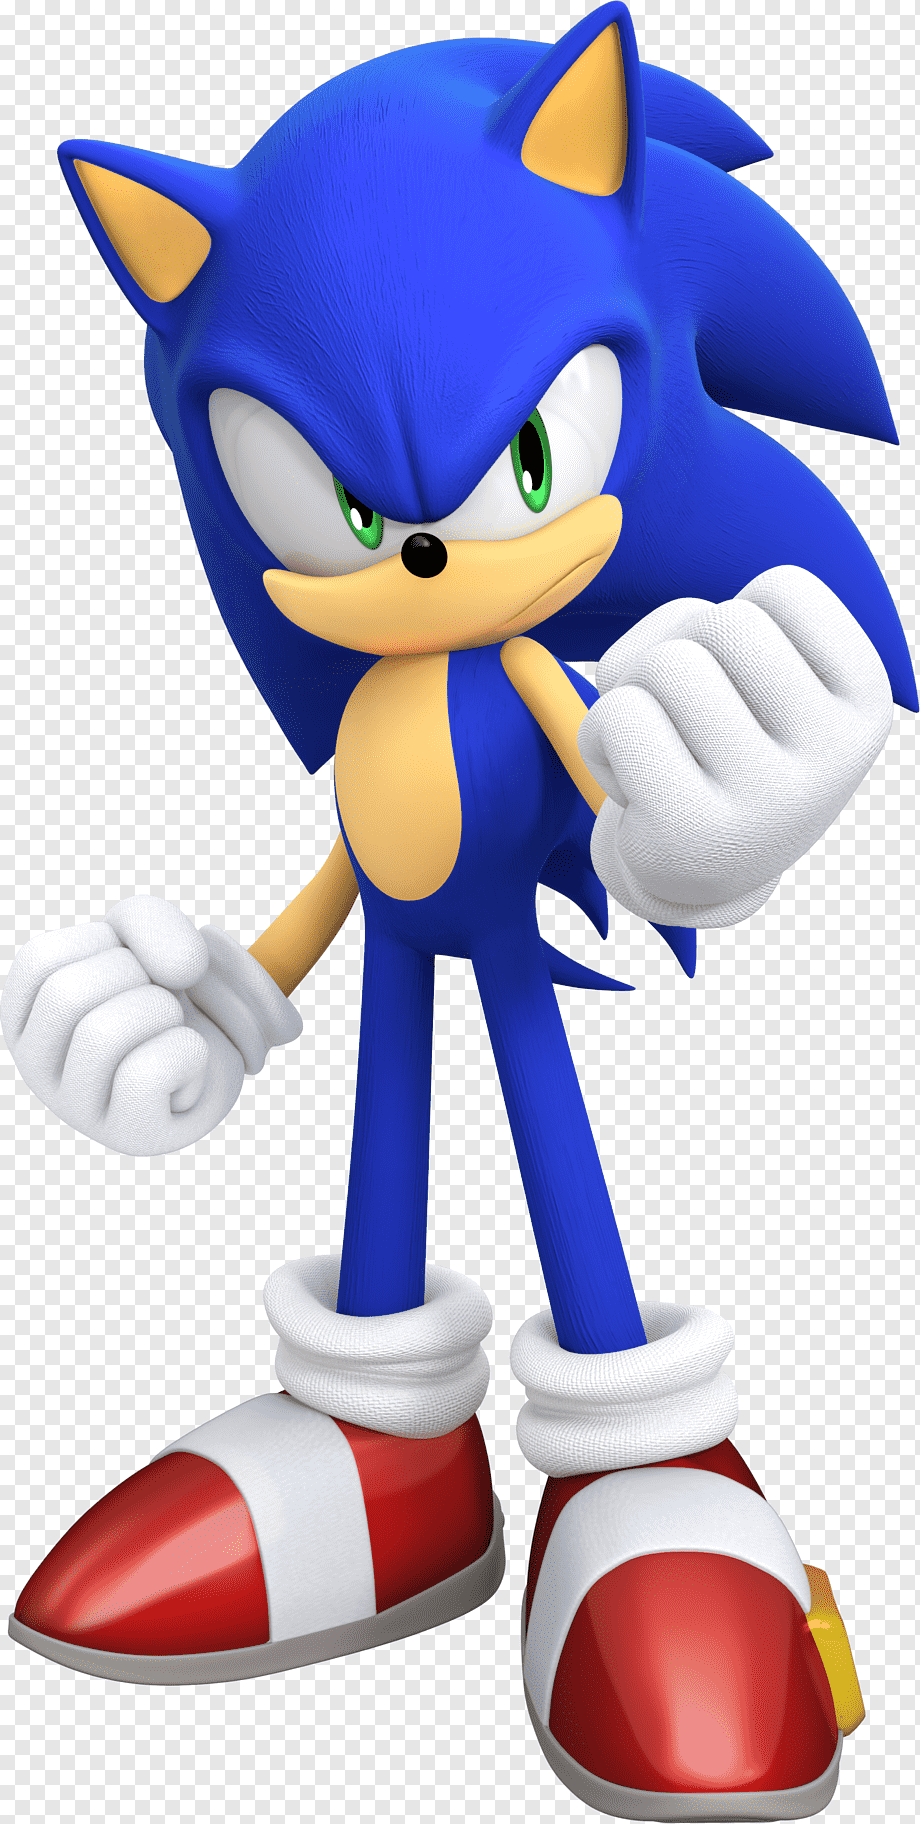 Sonic the Hedgehog Metal Sonic Tails Sonic Forces, hedgehog